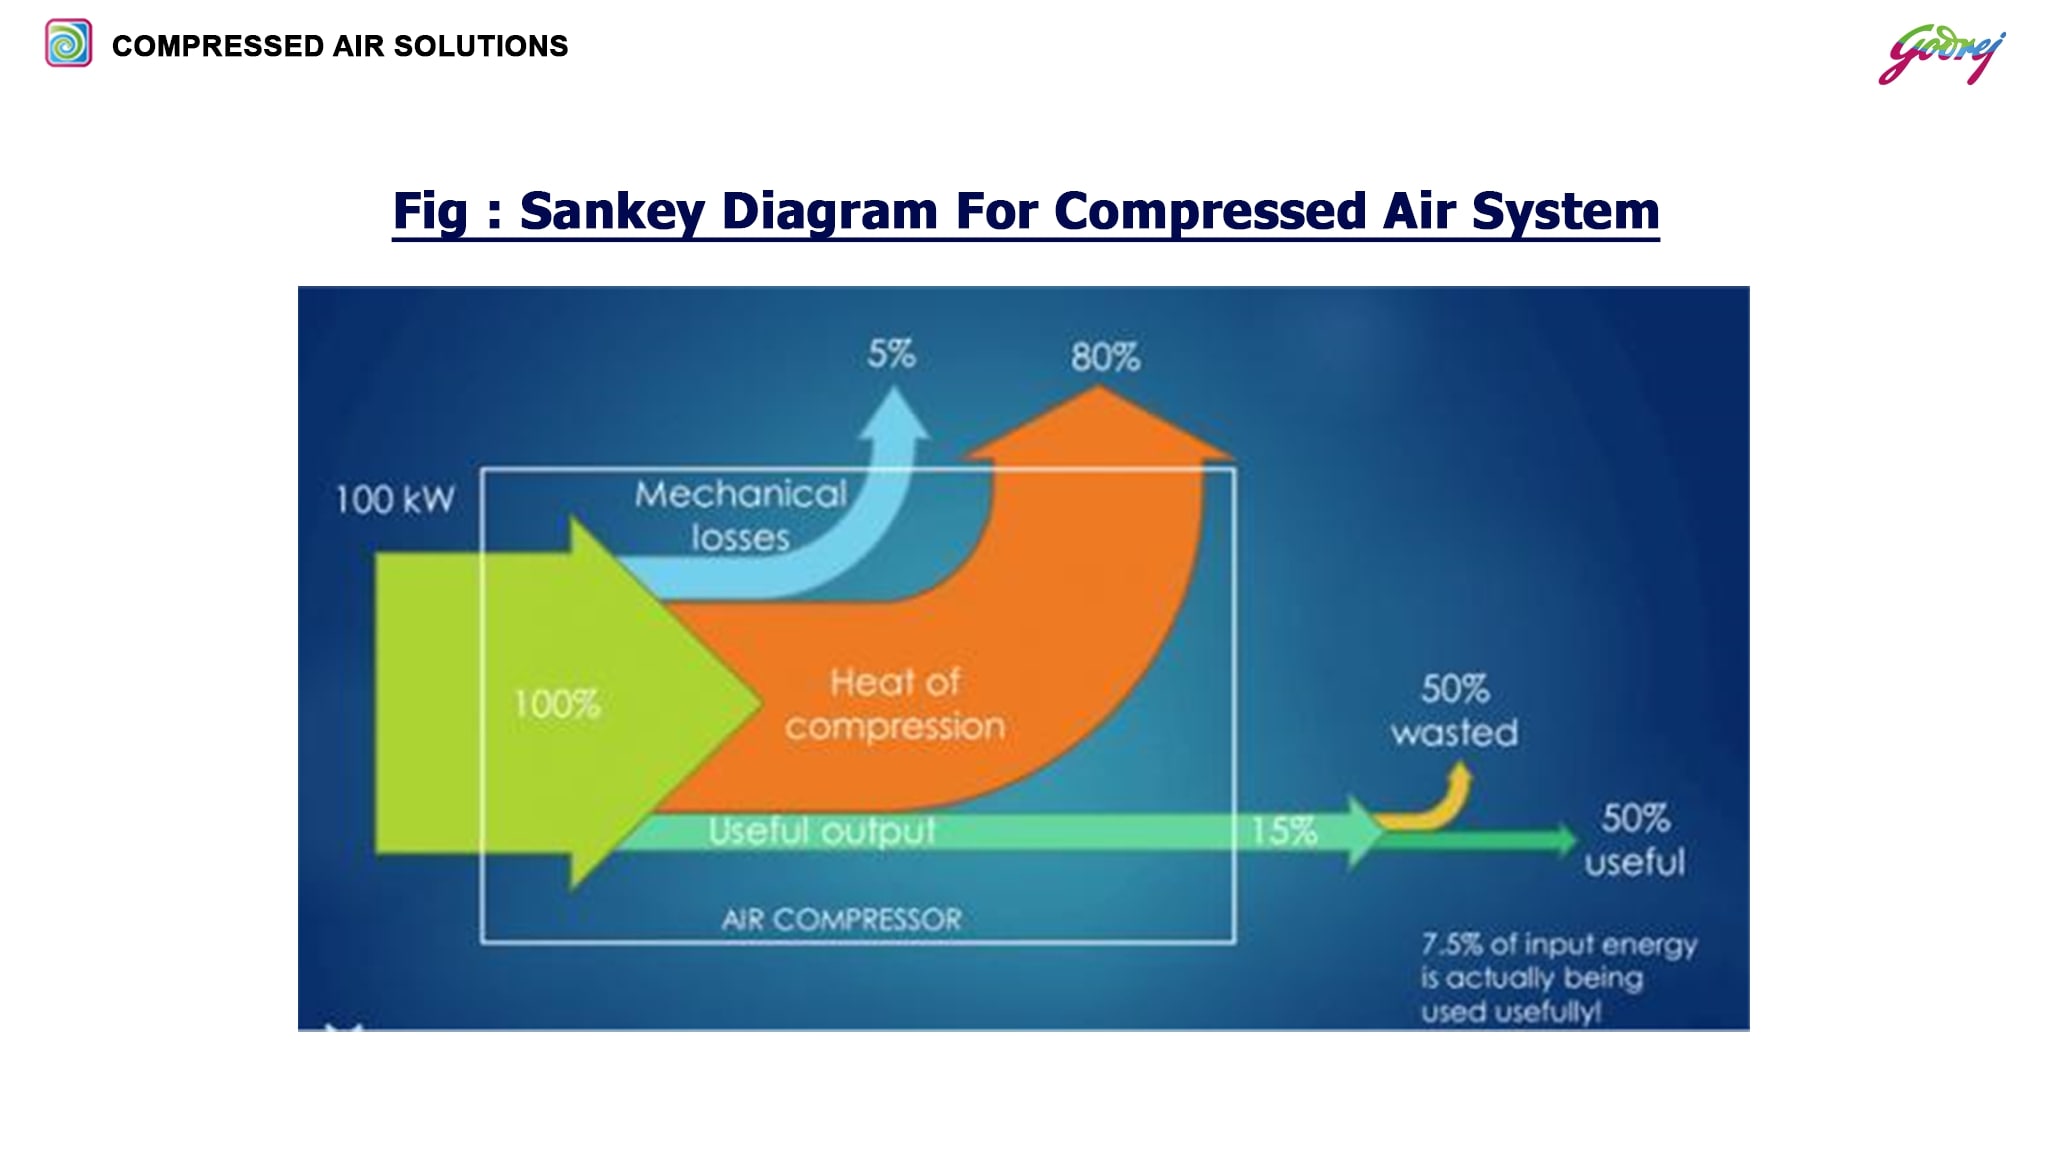 Sankey Diagram For Compressed Air System- ENERGY SAVING SOLUTIONS IN COMPRESSED AIR NETWORK (GODREJ)